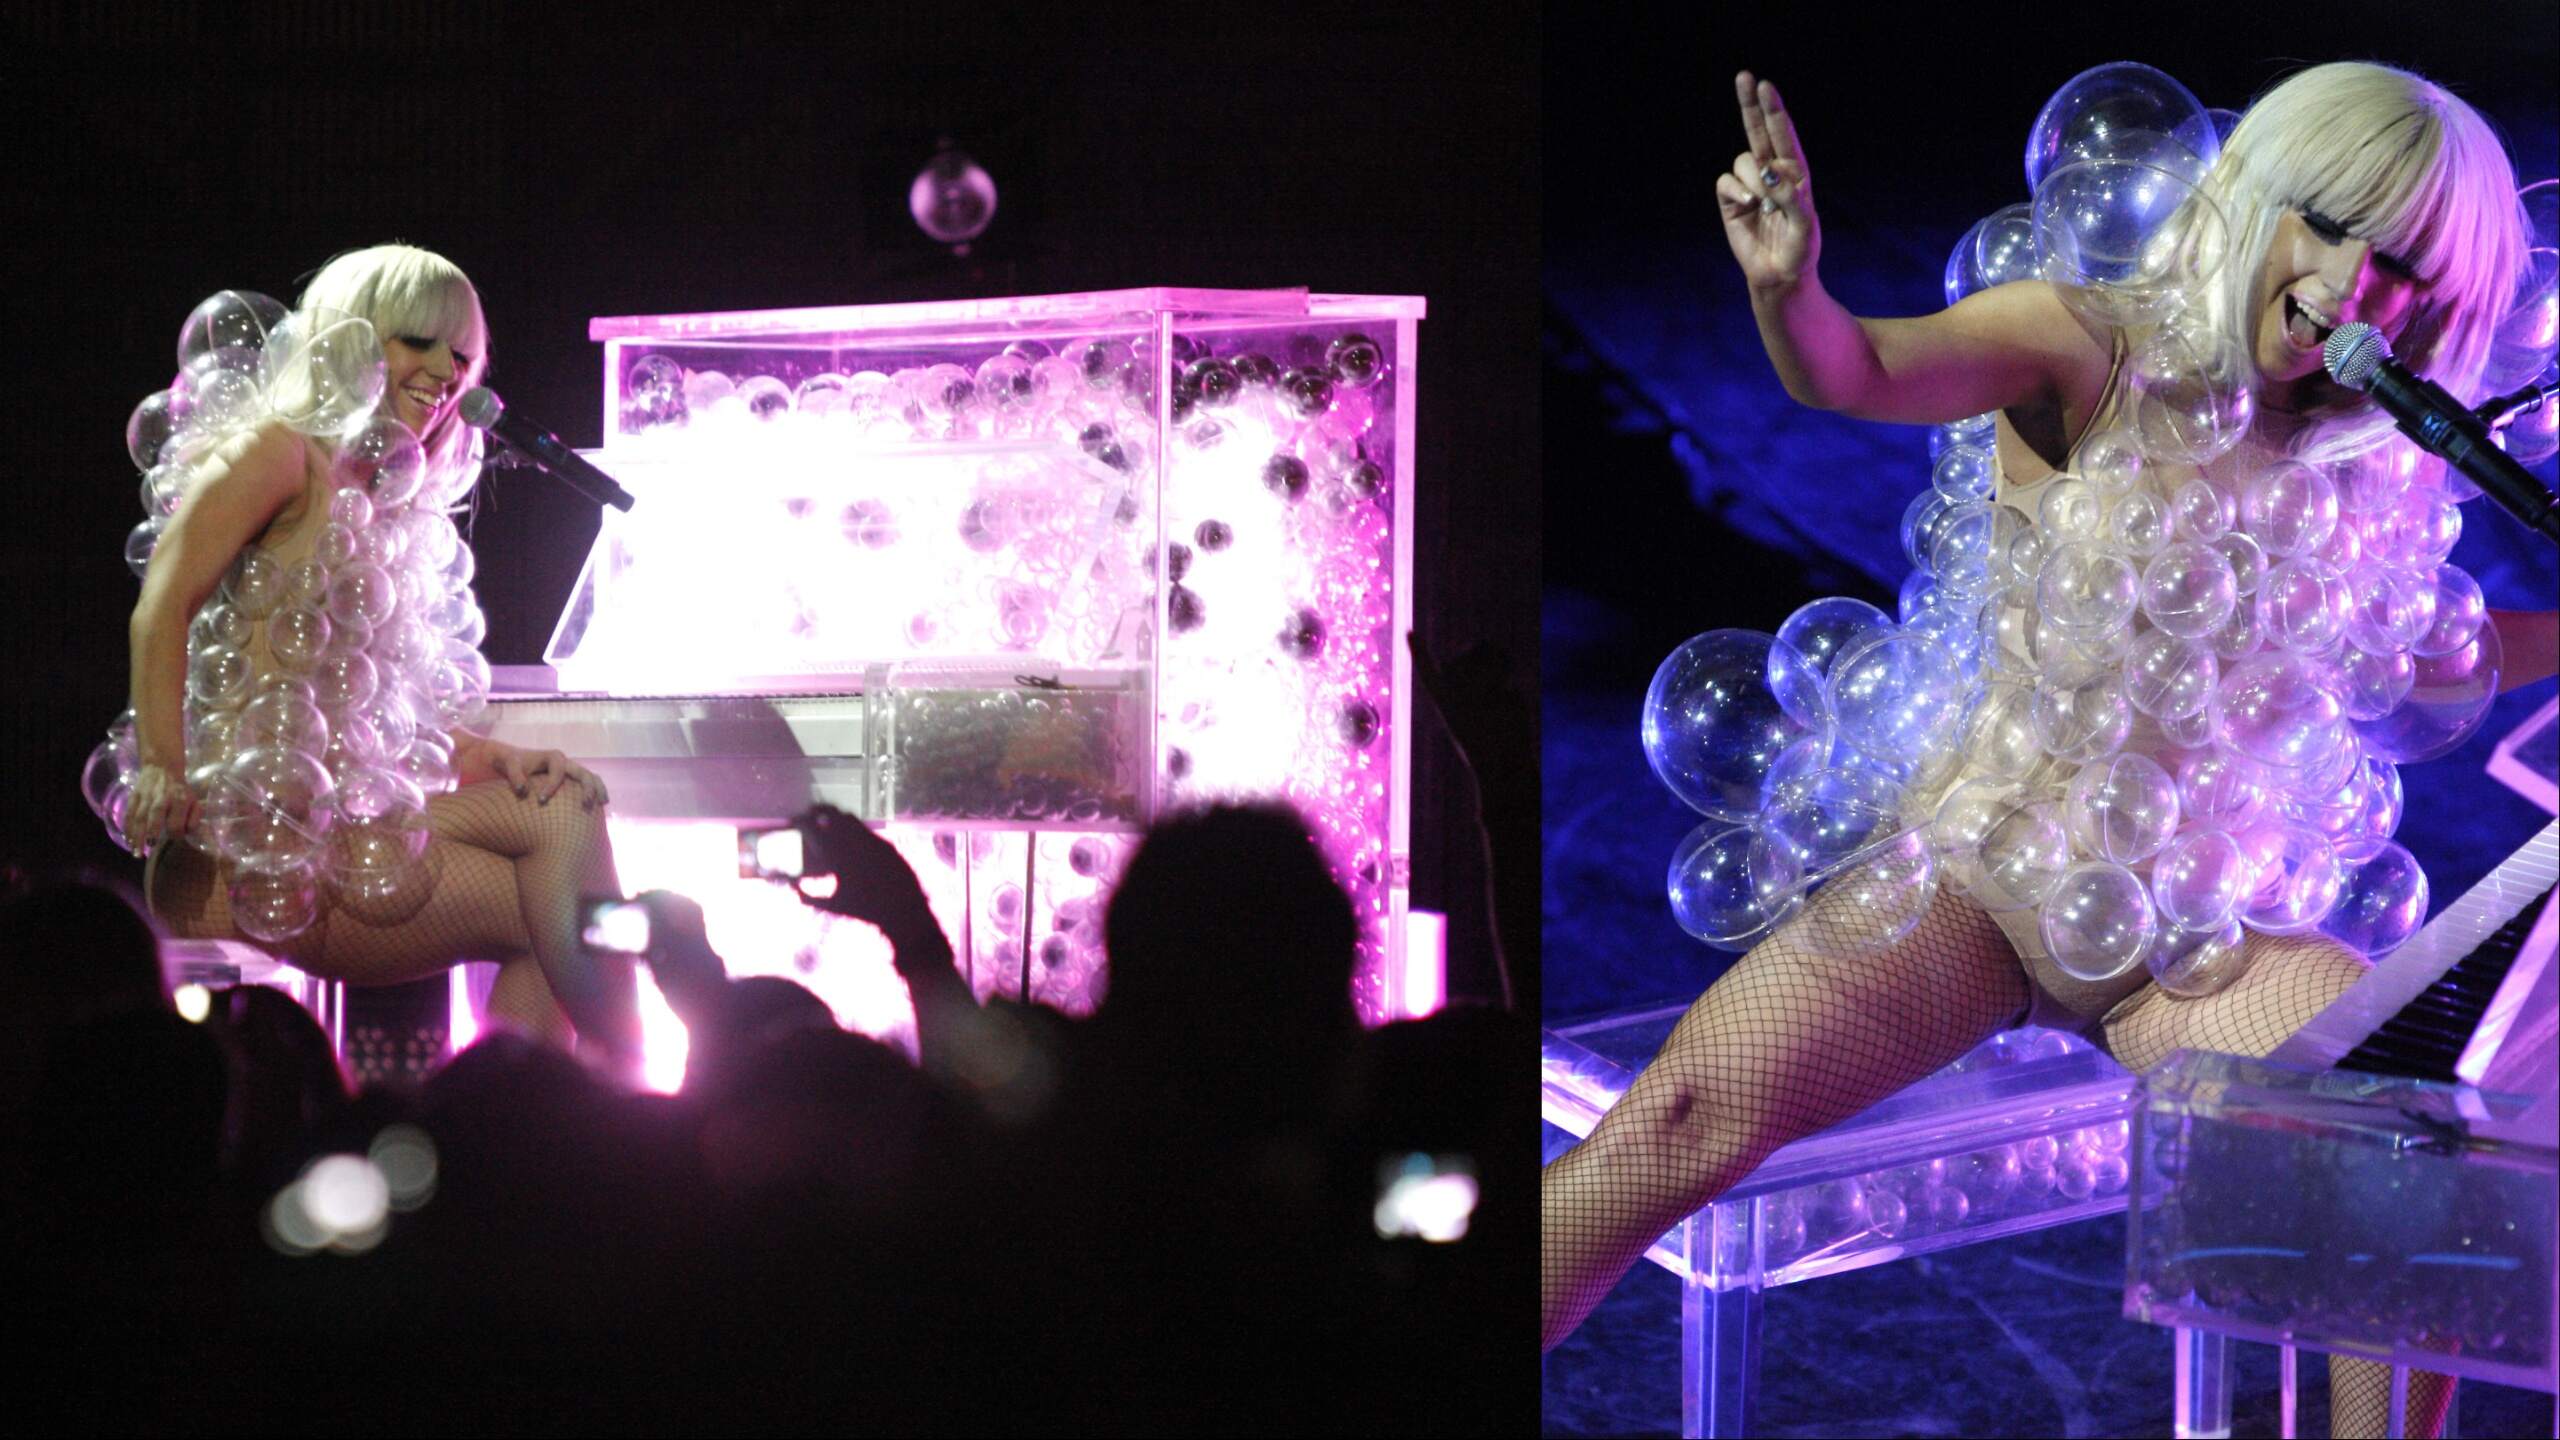 Singer Lady Gaga is covered in plastic bubbles as she plays the piano